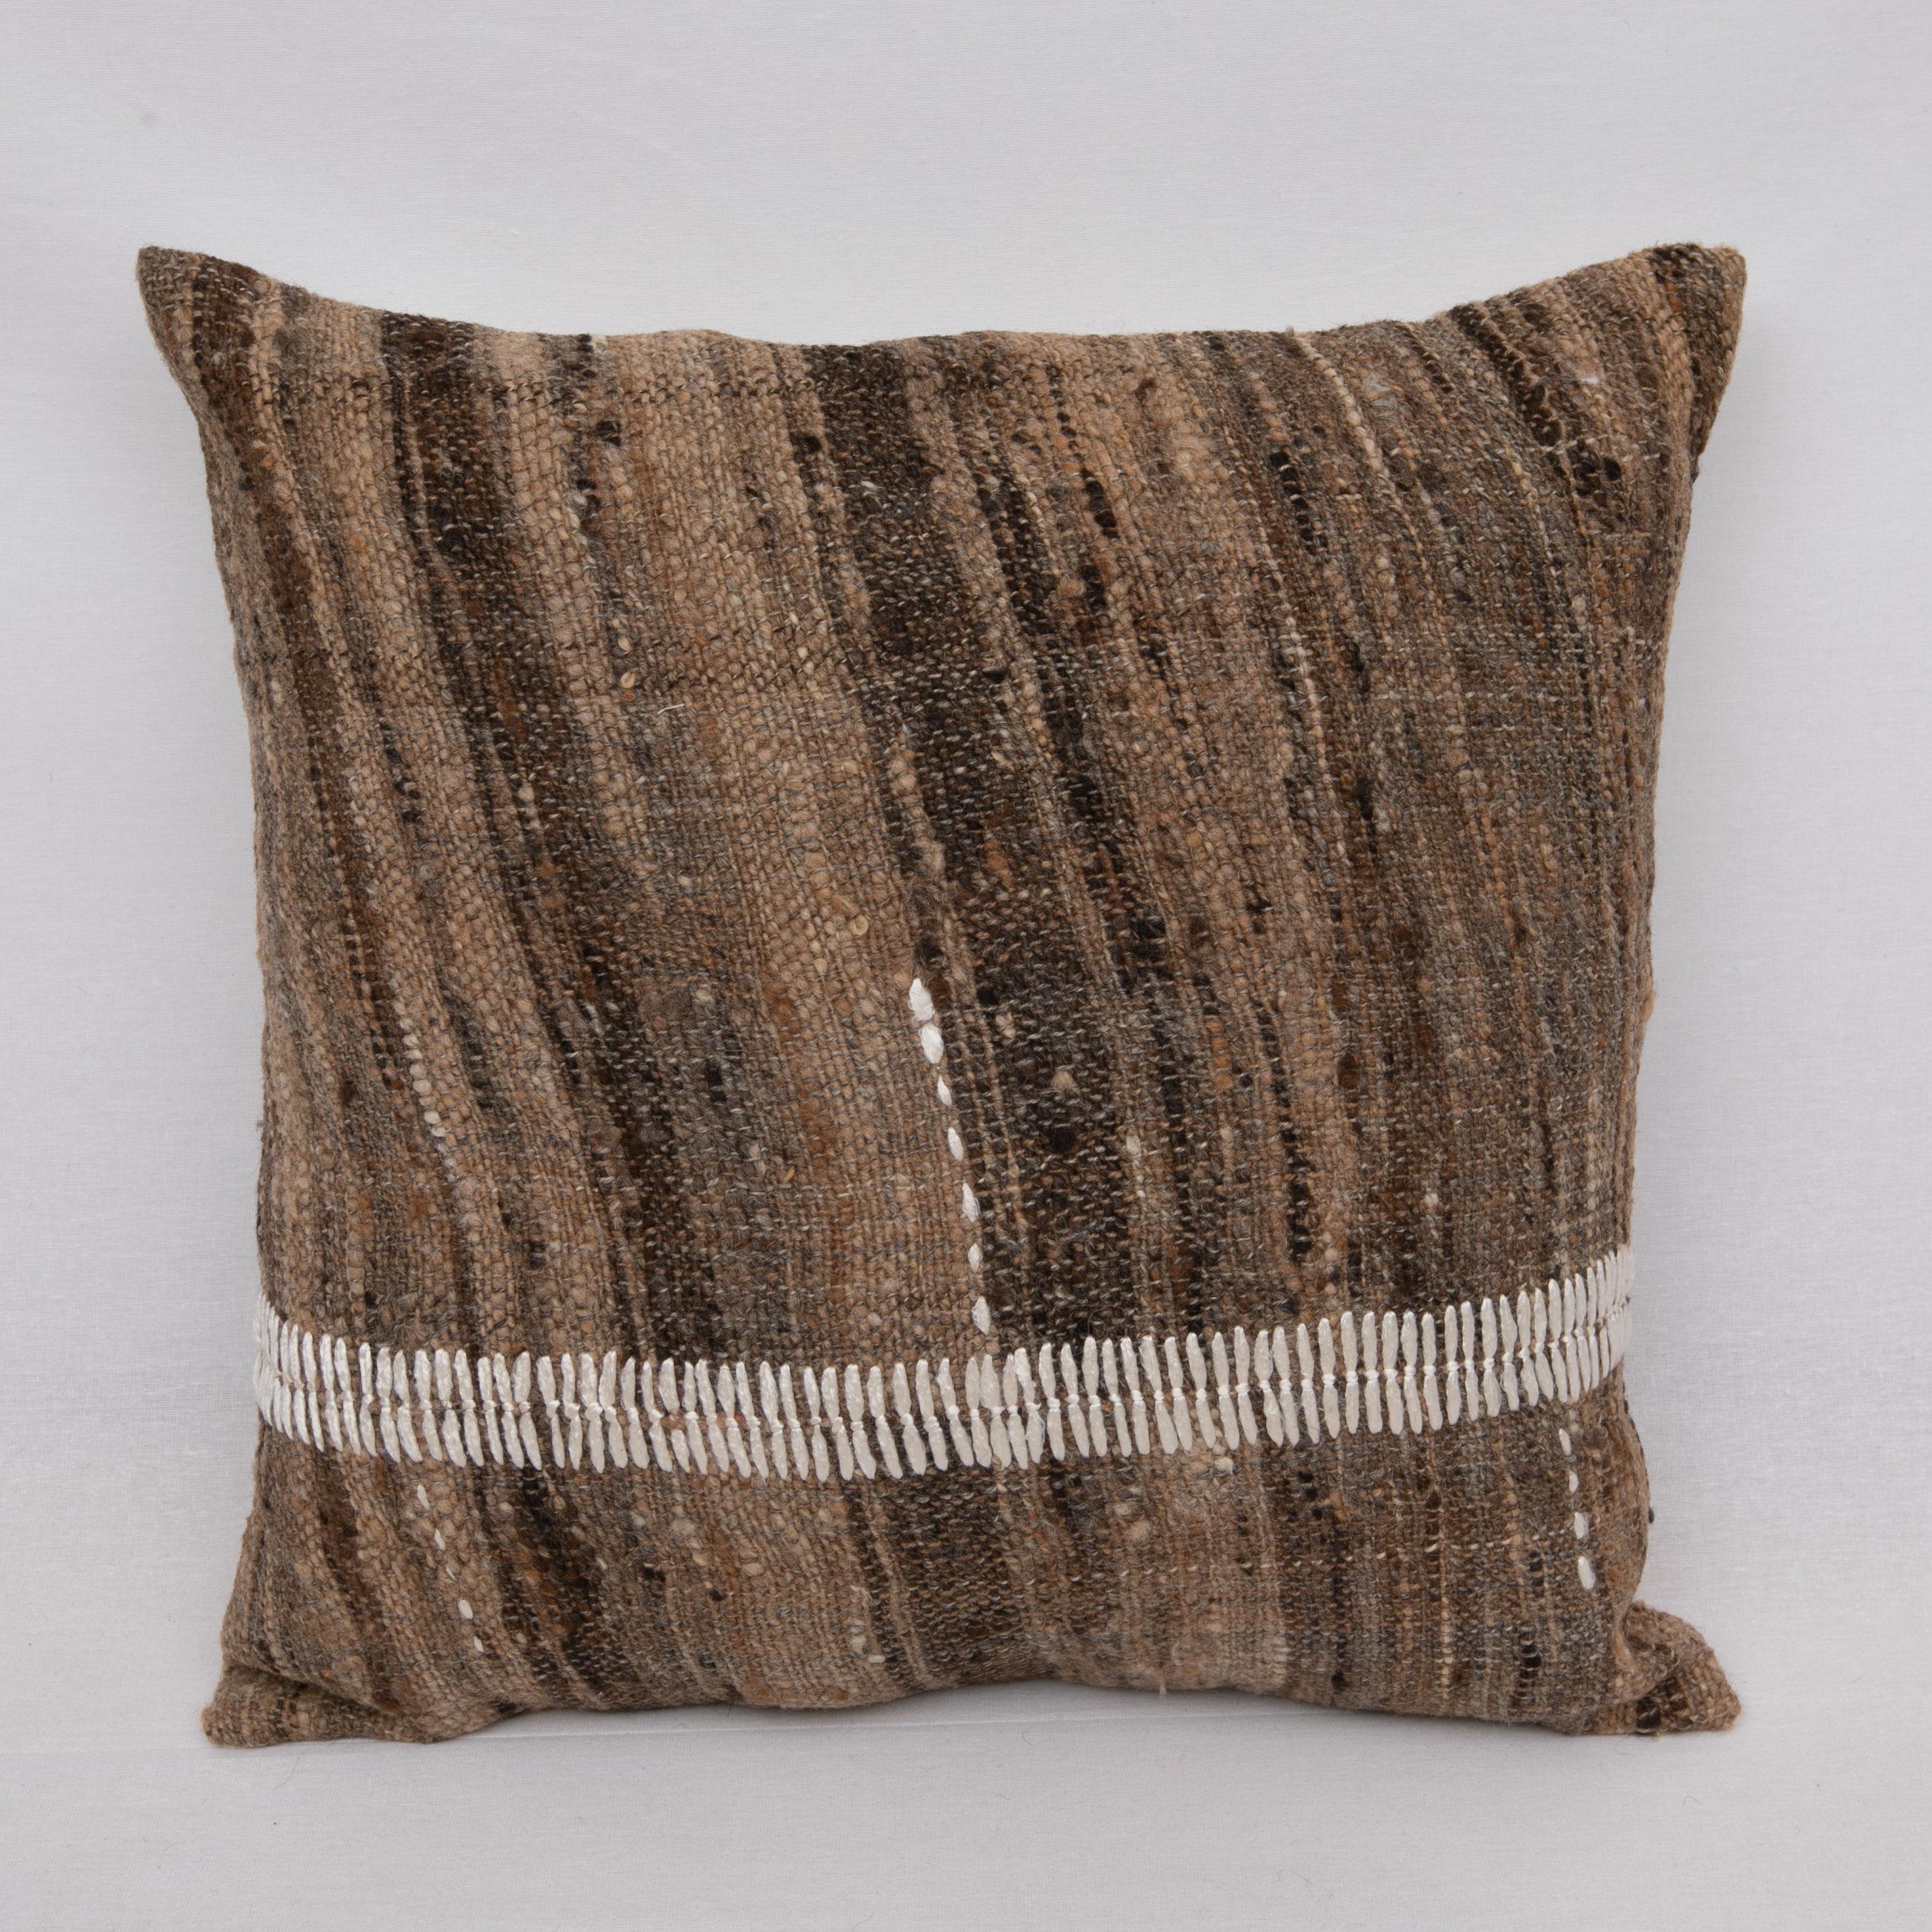 Rustic Pillow Case Made from a Vintage Un-Dyed Wool Coverlet, Mid 20th C. In Good Condition For Sale In Istanbul, TR